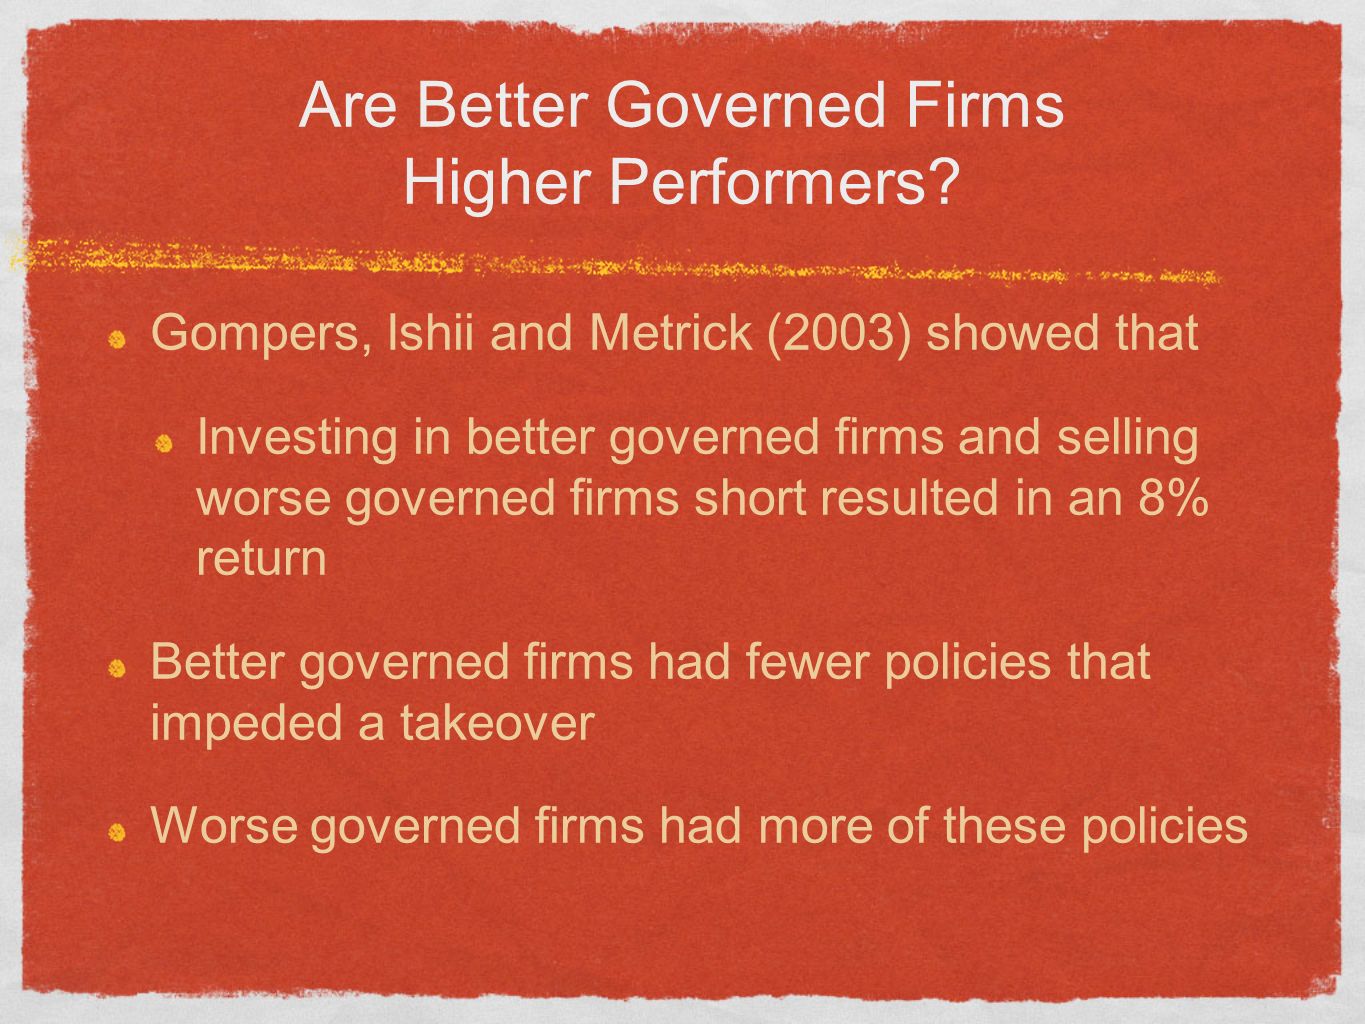 Are Better Governed Firms Higher Performers.